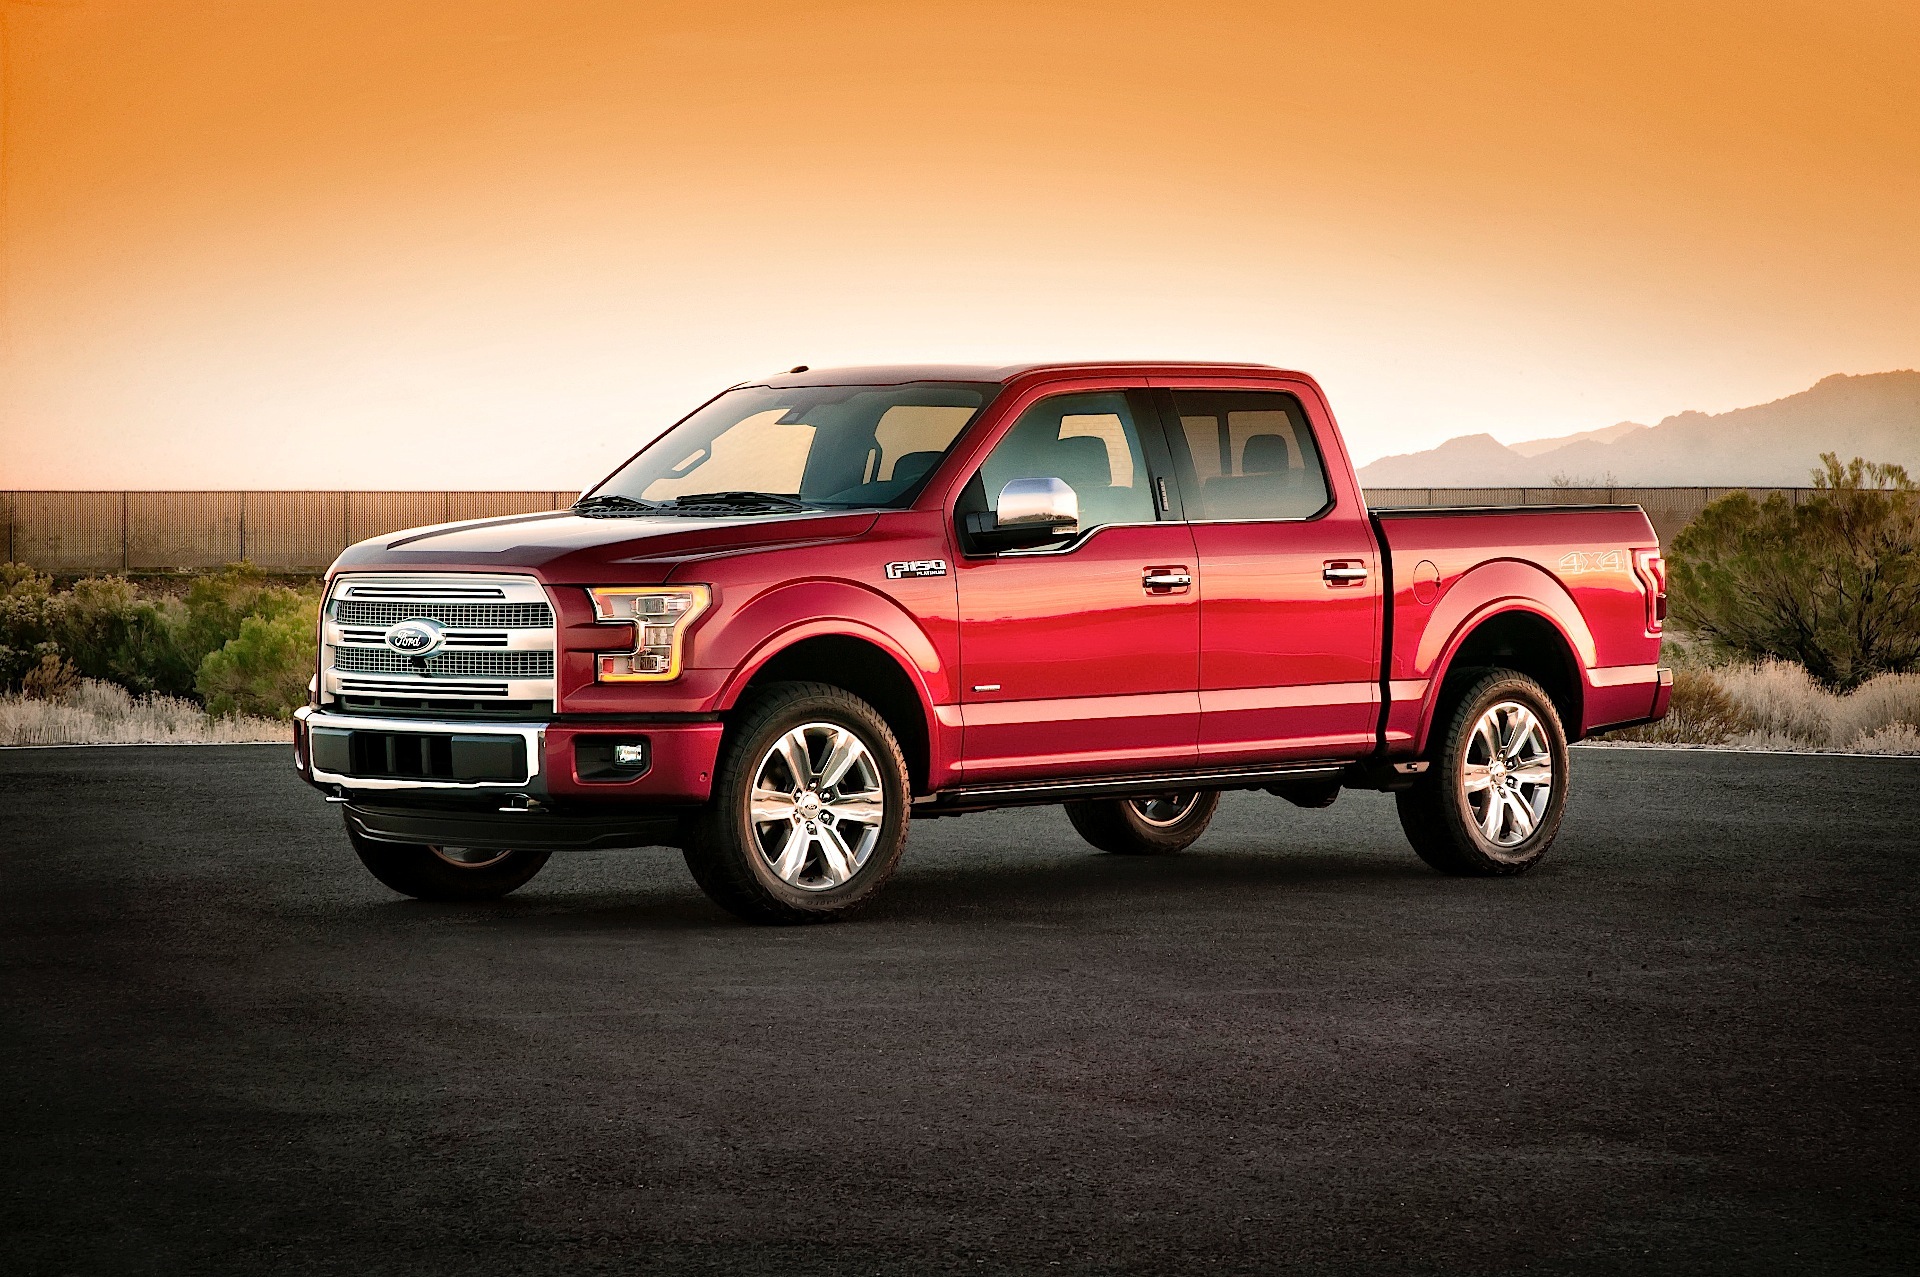 FORD F-150 Super Crew specs & photos - 2014, 2015, 2016, 2017, 2018 2012 Ford F 150 5.0 Towing Capacity